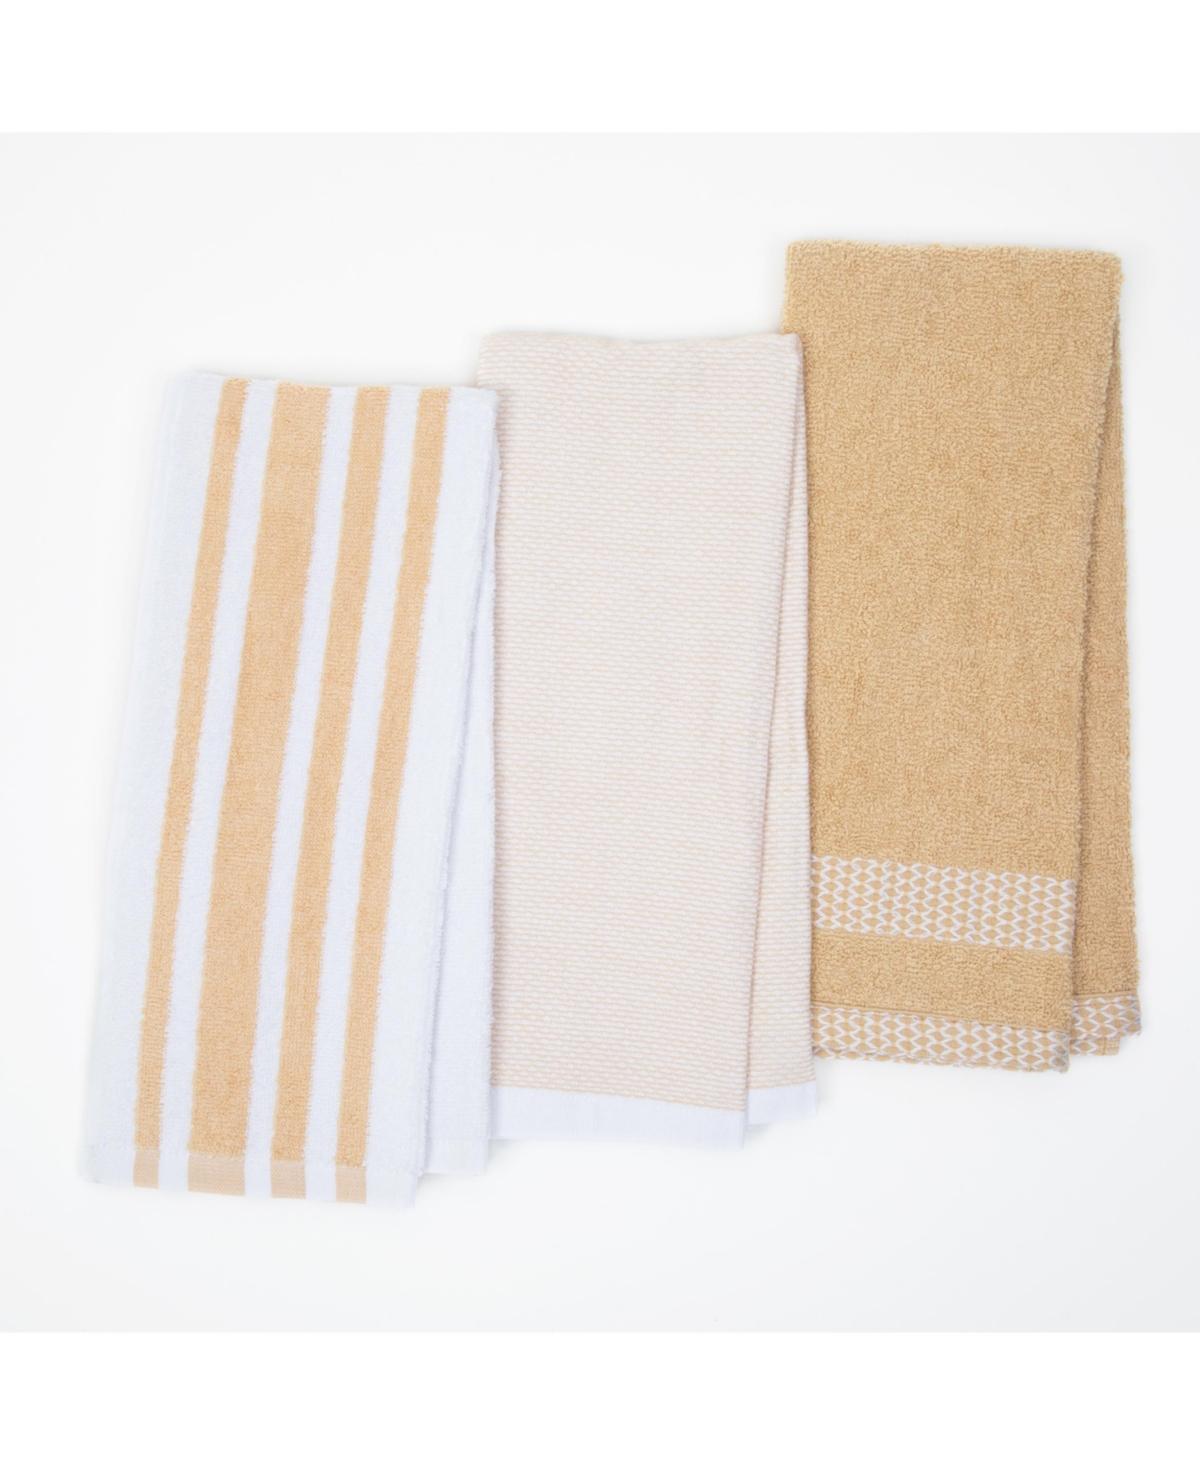 Premium Weave Yarn Dyed Kitchen Towels (Pack of 6), 100% Cotton, 16 x 26 in - Cinnamon